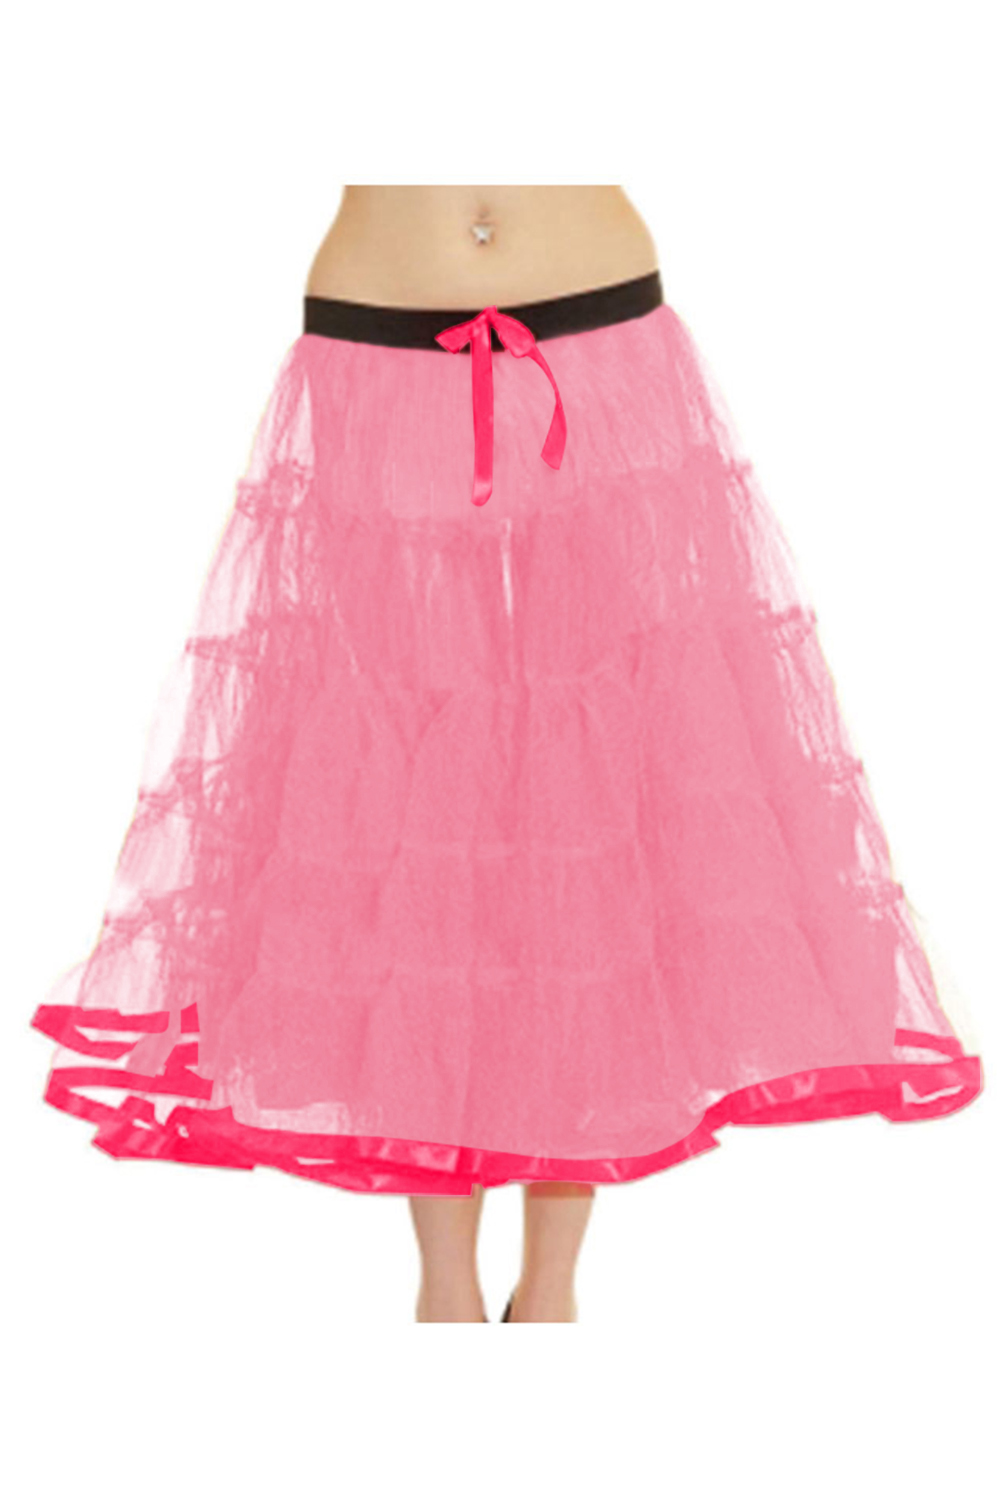 Crazy Chick Adult 5 Tier Petticoat with Ribbon Pink Tutu Skirt (Approximately 30 Inches Long)